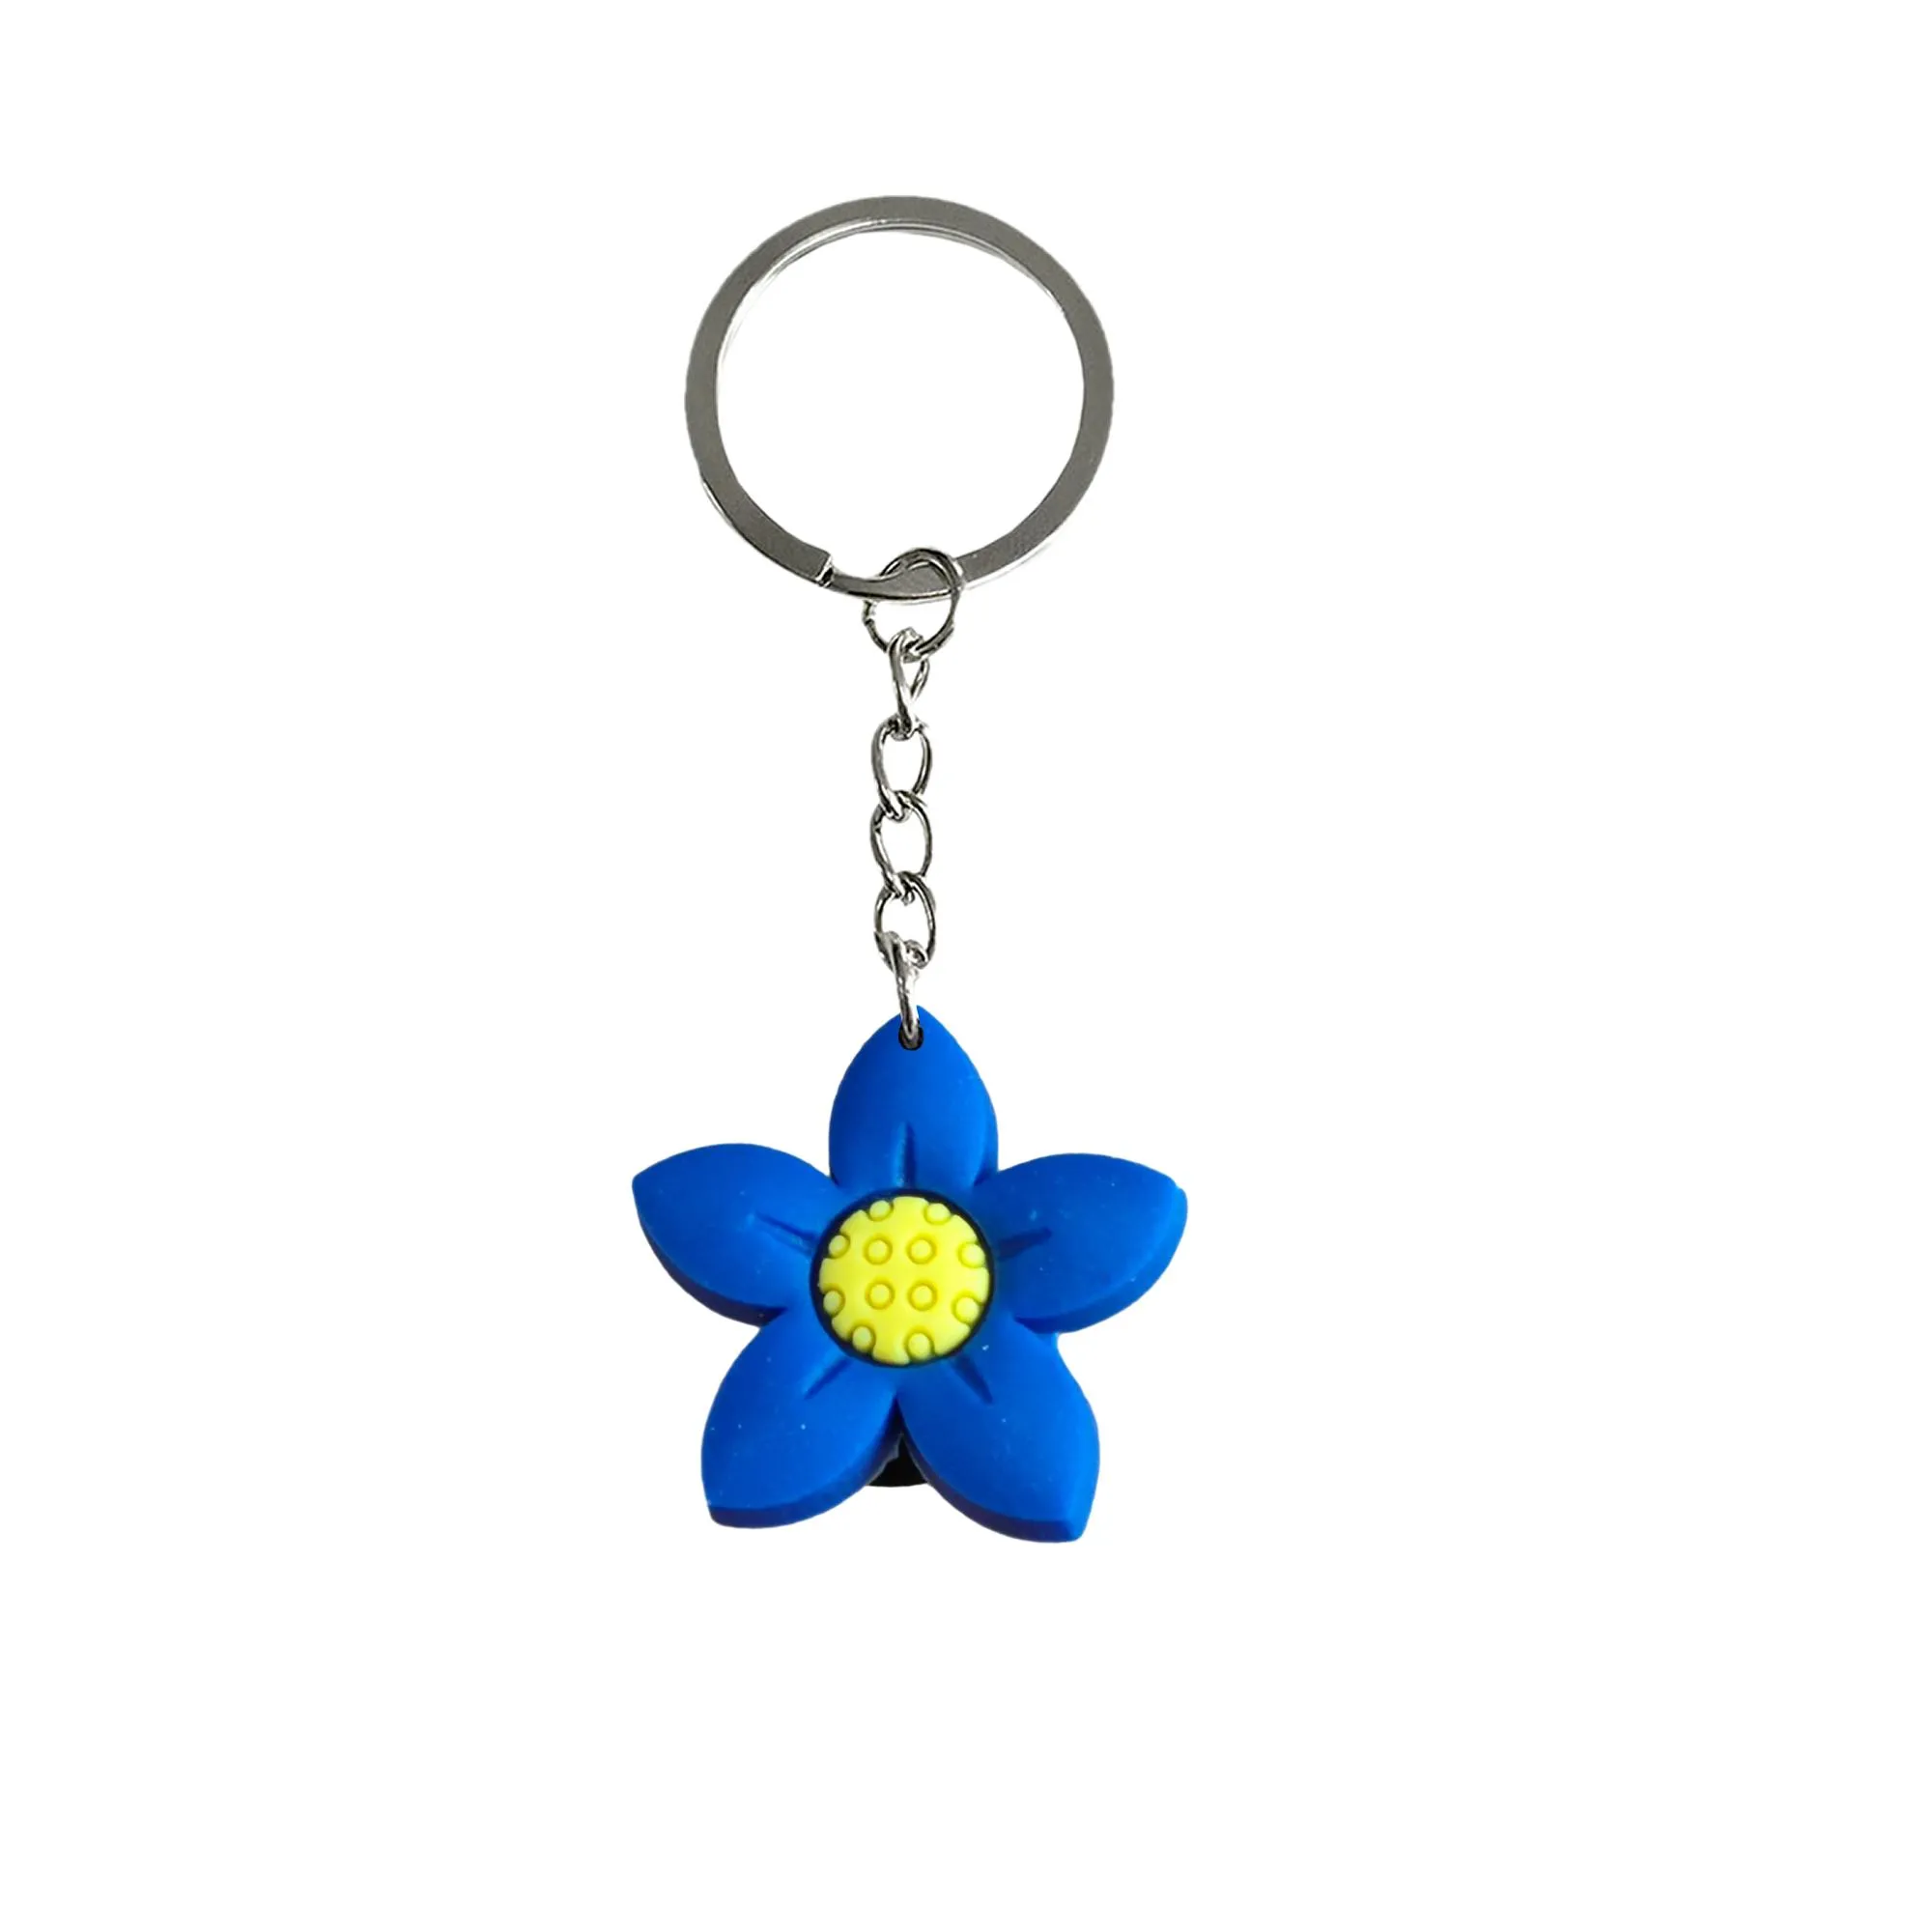 flower 2 12 keychain cool colorful anime character with wristlet pendants accessories for kids birthday party favors keychains backpacks keyring suitable schoolbag girls school bags backpack